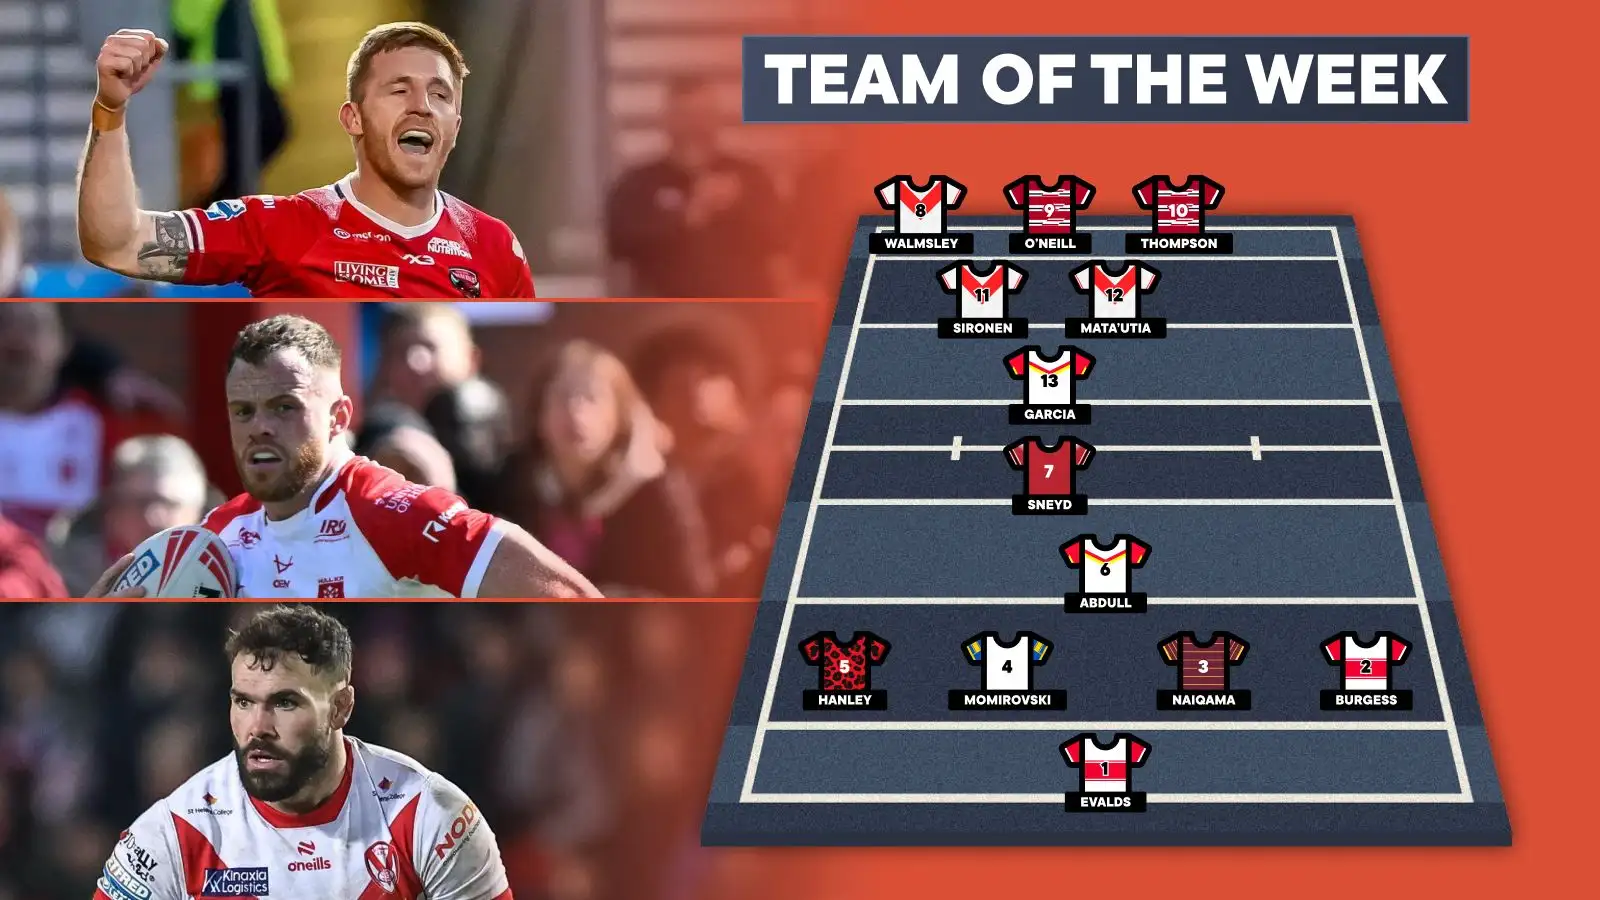 St Helens, Hull KR, Wigan Warriors provide 7 stars in Super League Team of the Week